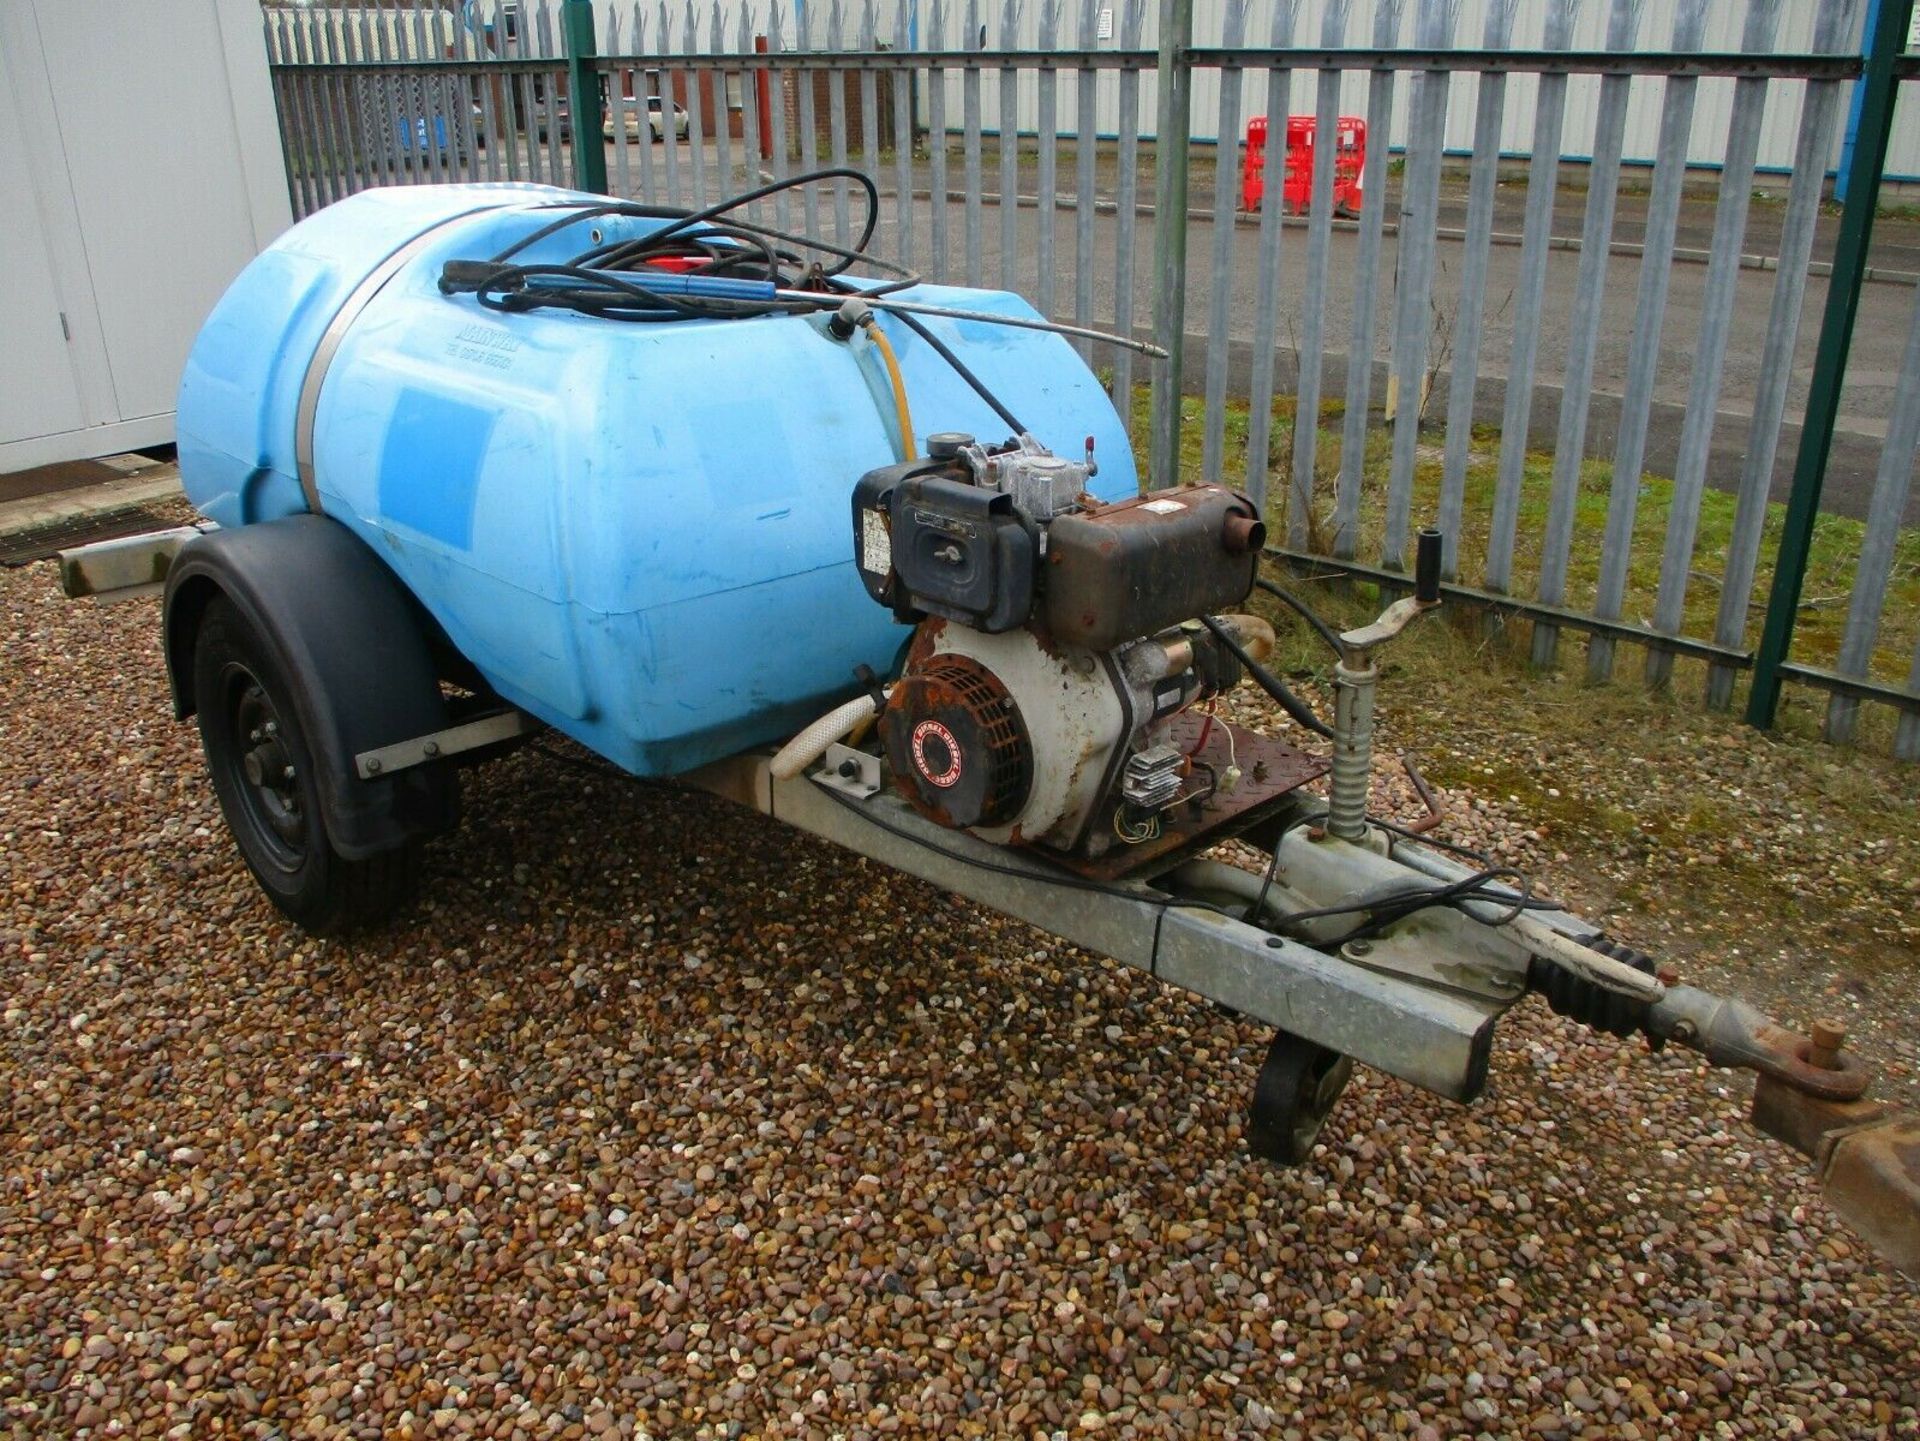 Towable bowser diesel power pressure washer - Image 2 of 7